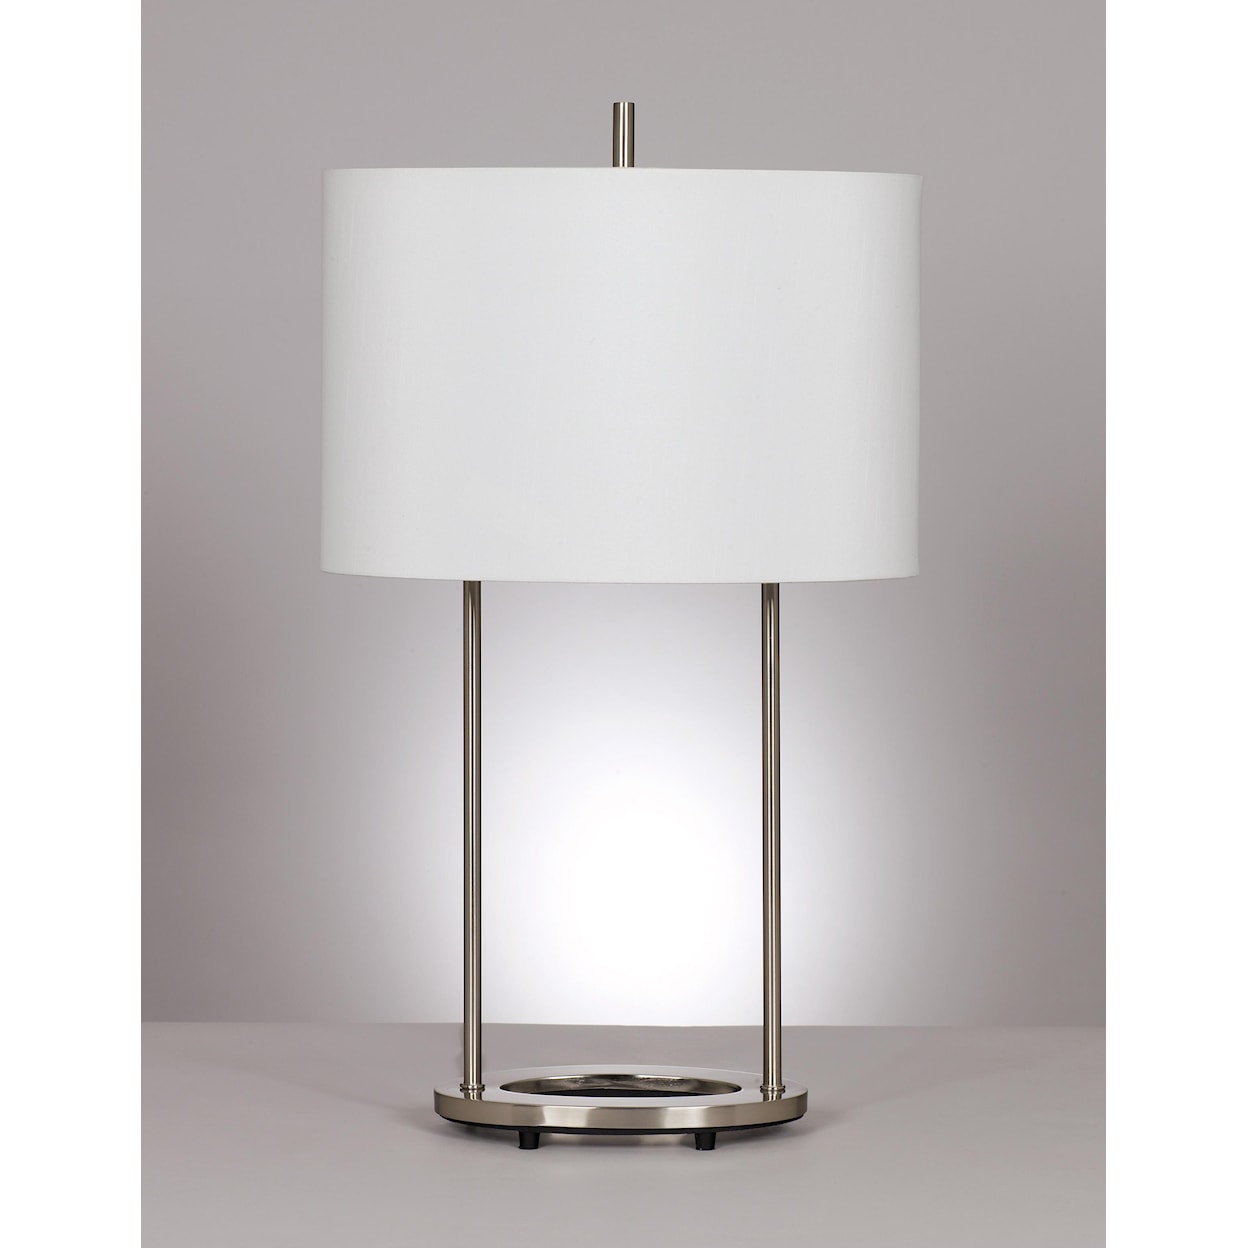 Ashley Furniture Signature Design Lamps - Metro Modern Set of 2 Maisie Table Lamps